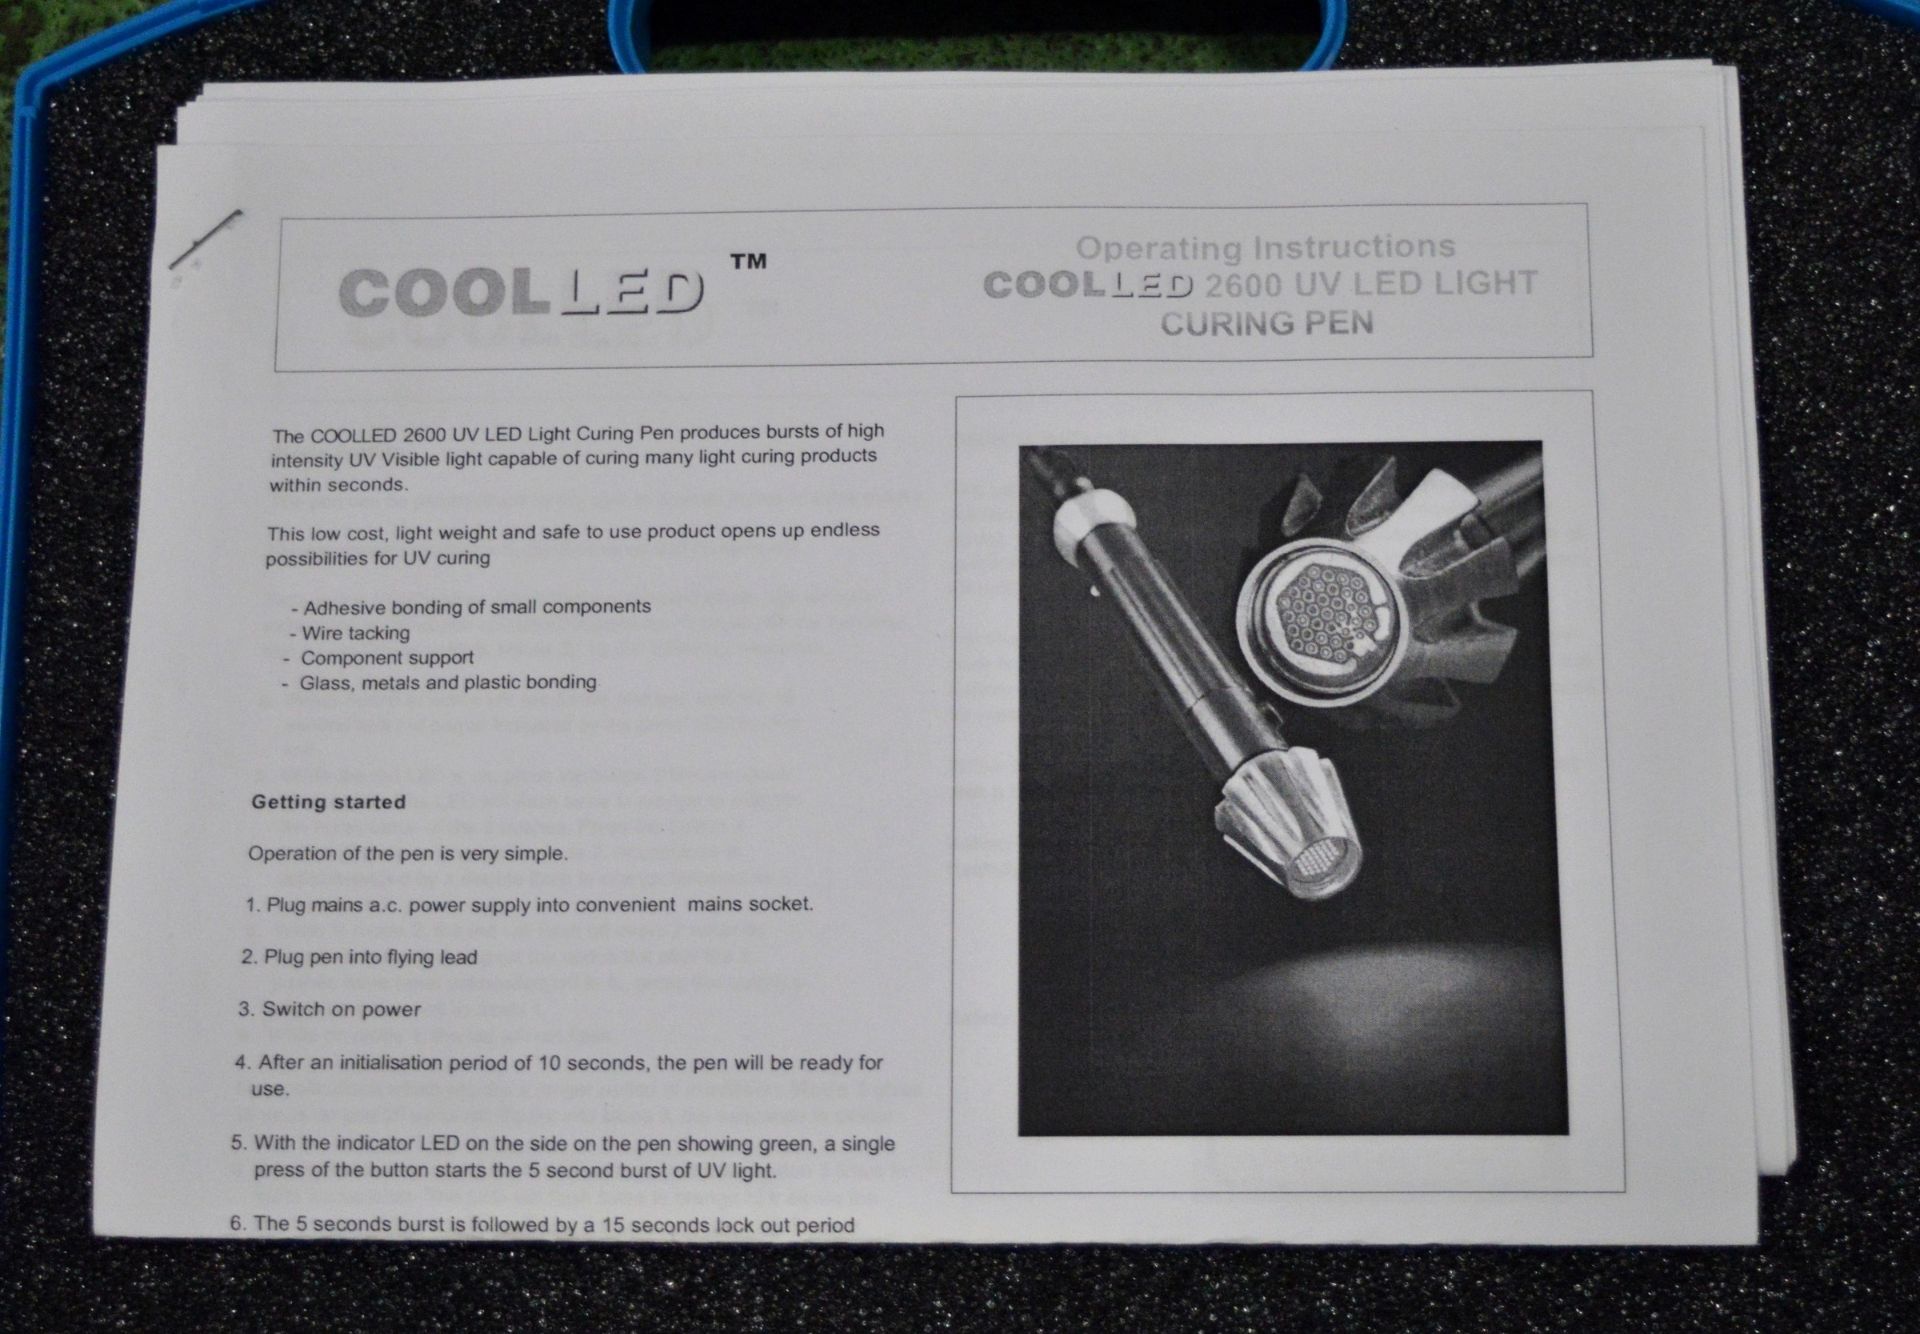 Cooled 2600 UV LED Light Curing Pen in a Case - Image 2 of 2